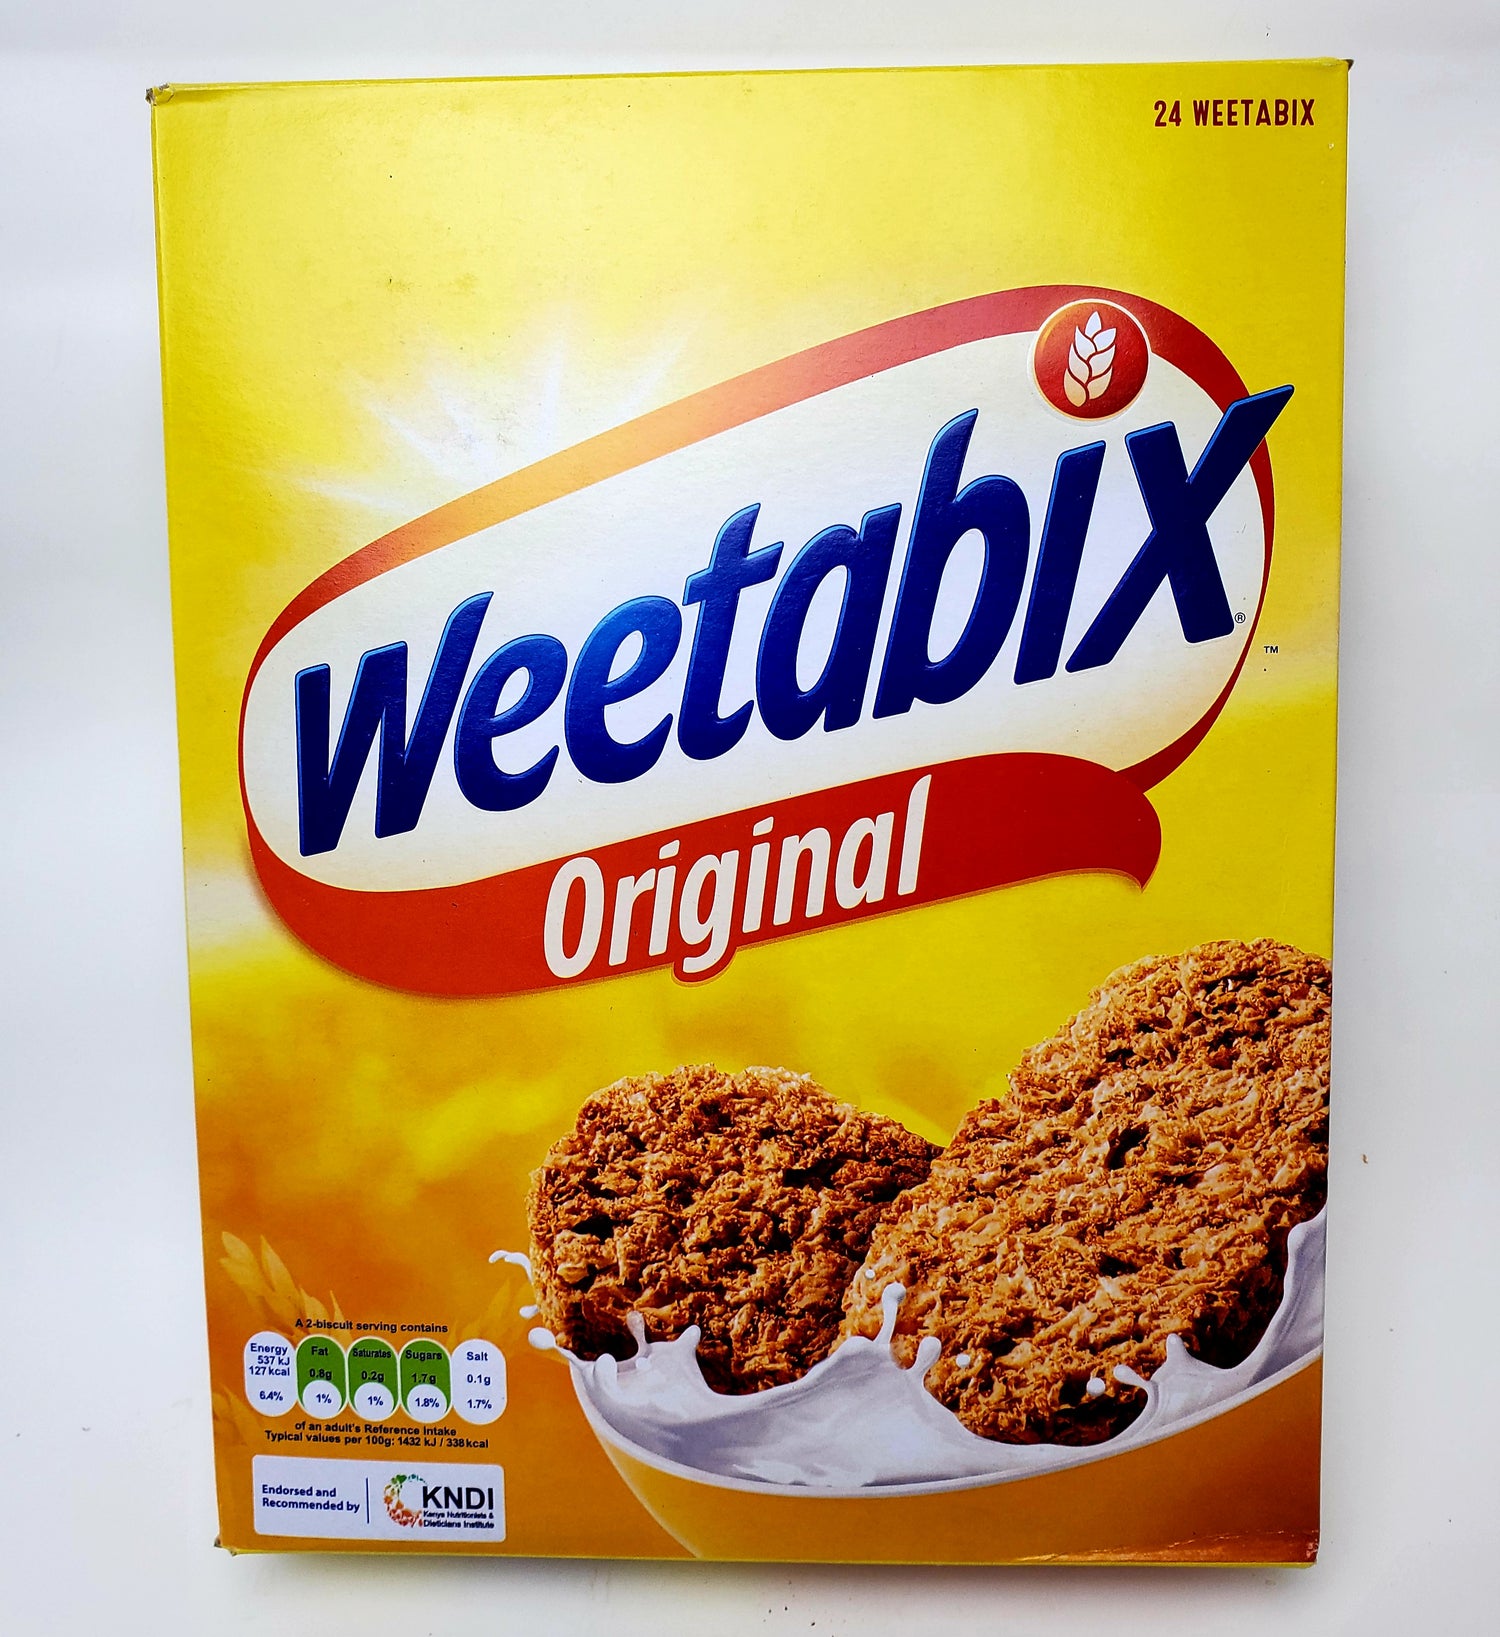 Weetabix milked a binary question for PR fame - it worked